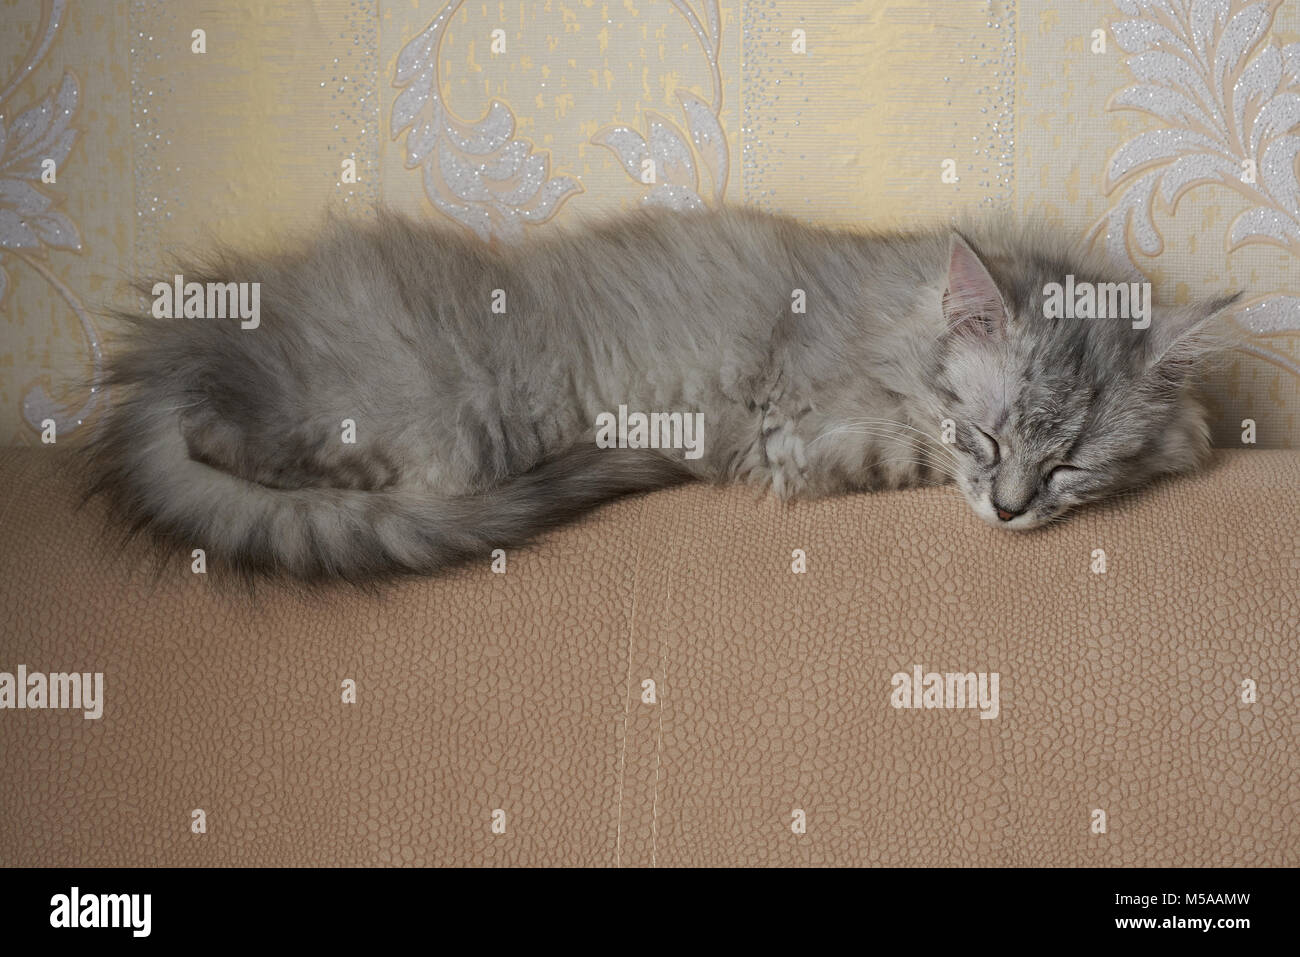 Un gray fluffy kitty cat sleeping on chambre canapé Banque D'Images